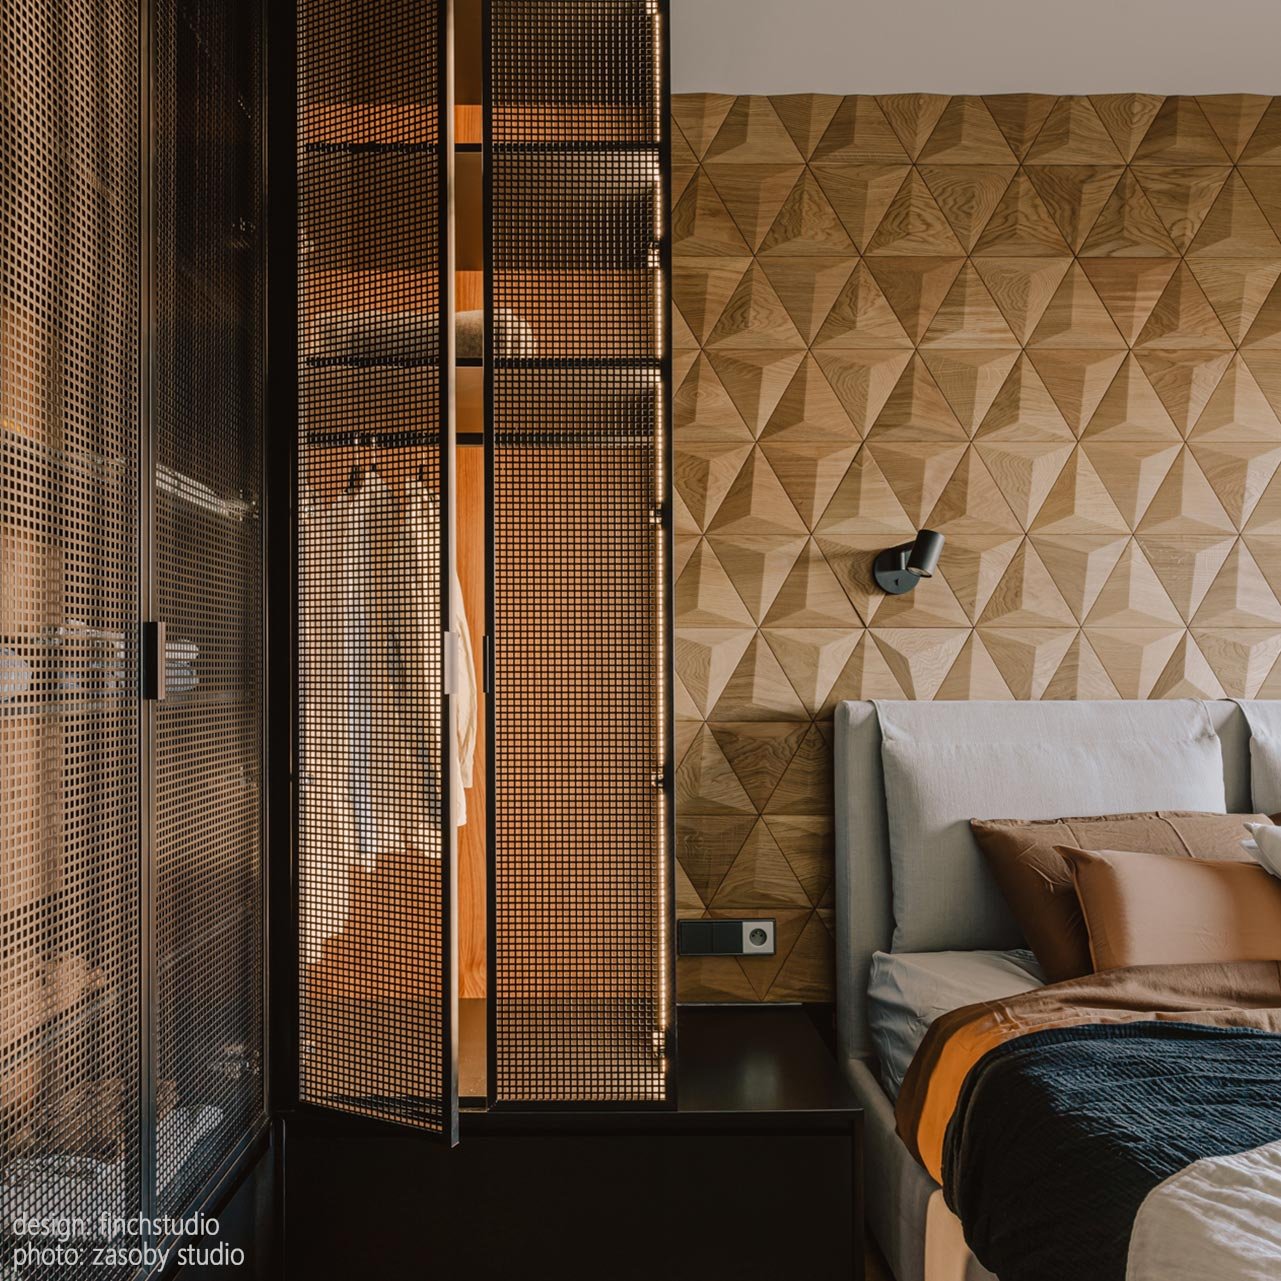 3D Decorative Wall Panelling in hotel bedroom interior